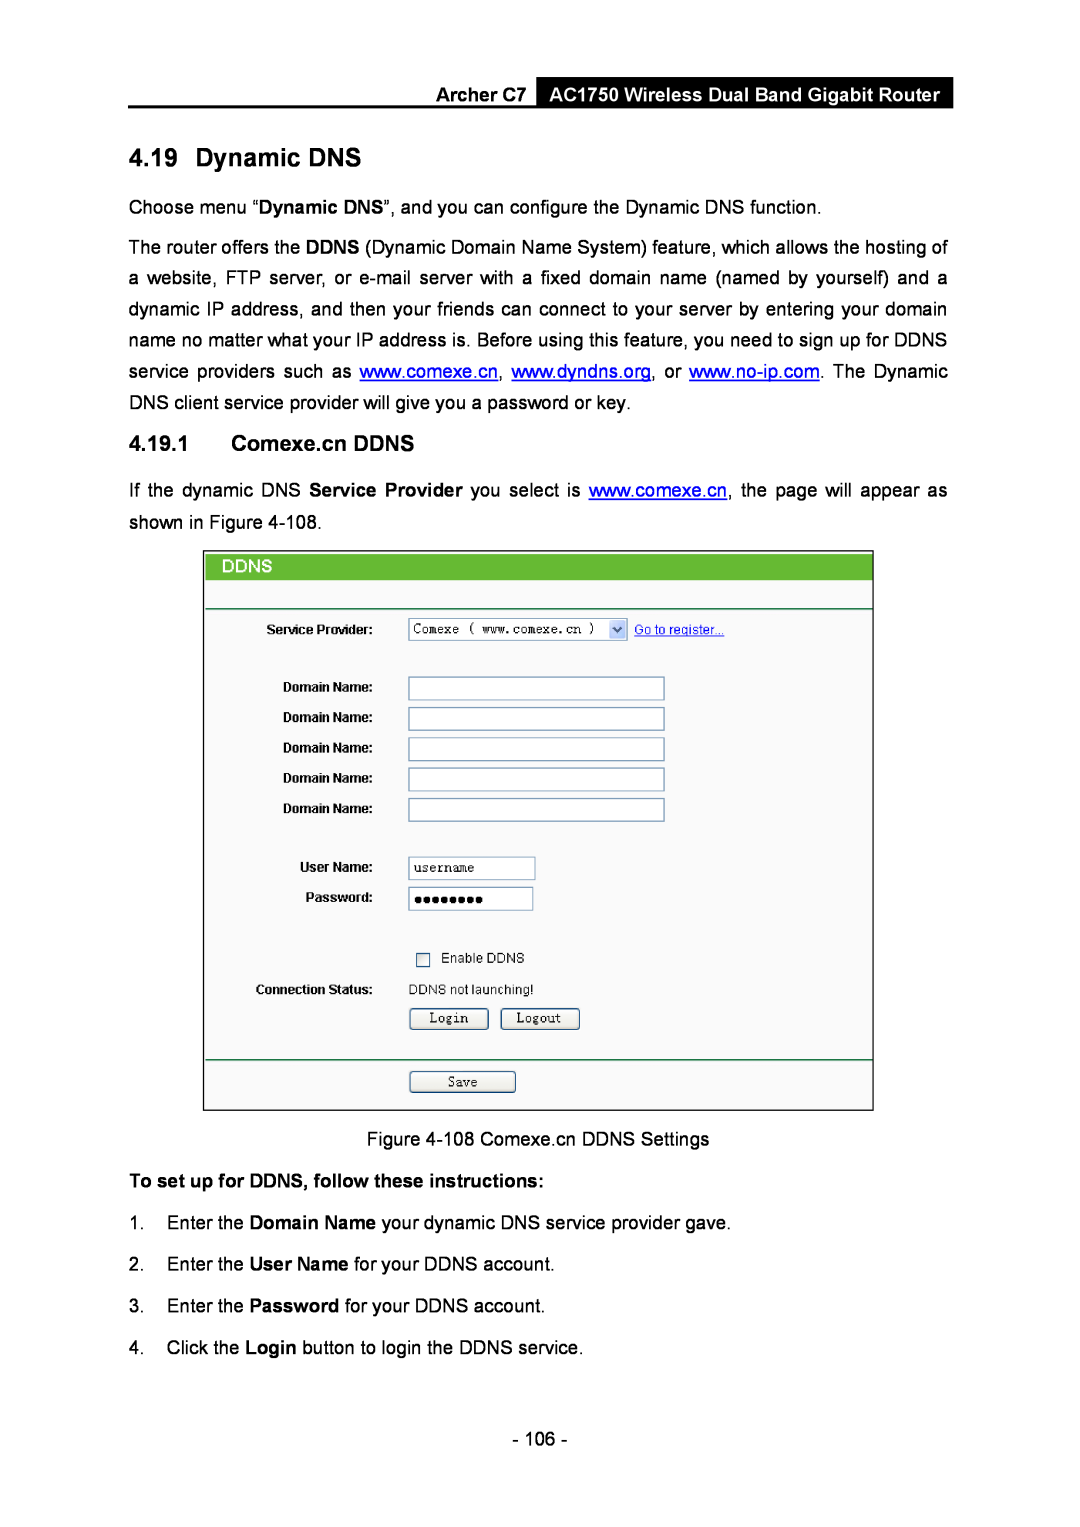 TP-Link AC1750 manual Dynamic DNS, Comexe.cn DDNS, To set up for DDNS, follow these instructions 